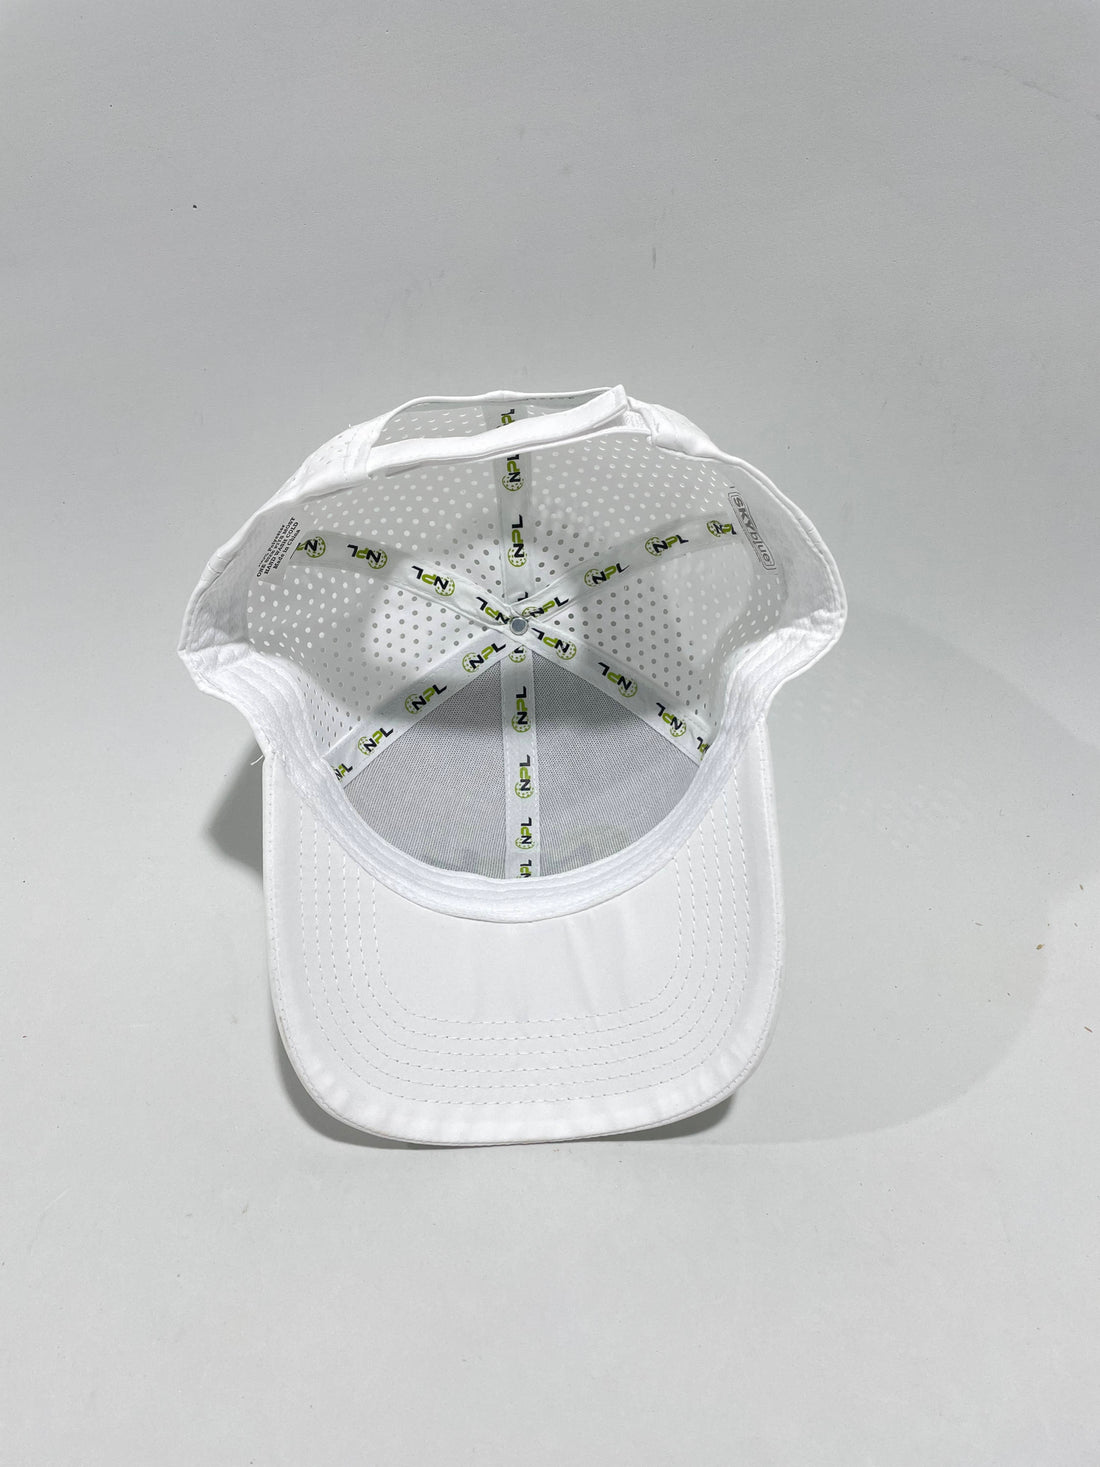 NPL Hat - New - Embroidered - Reinforced front panel - White